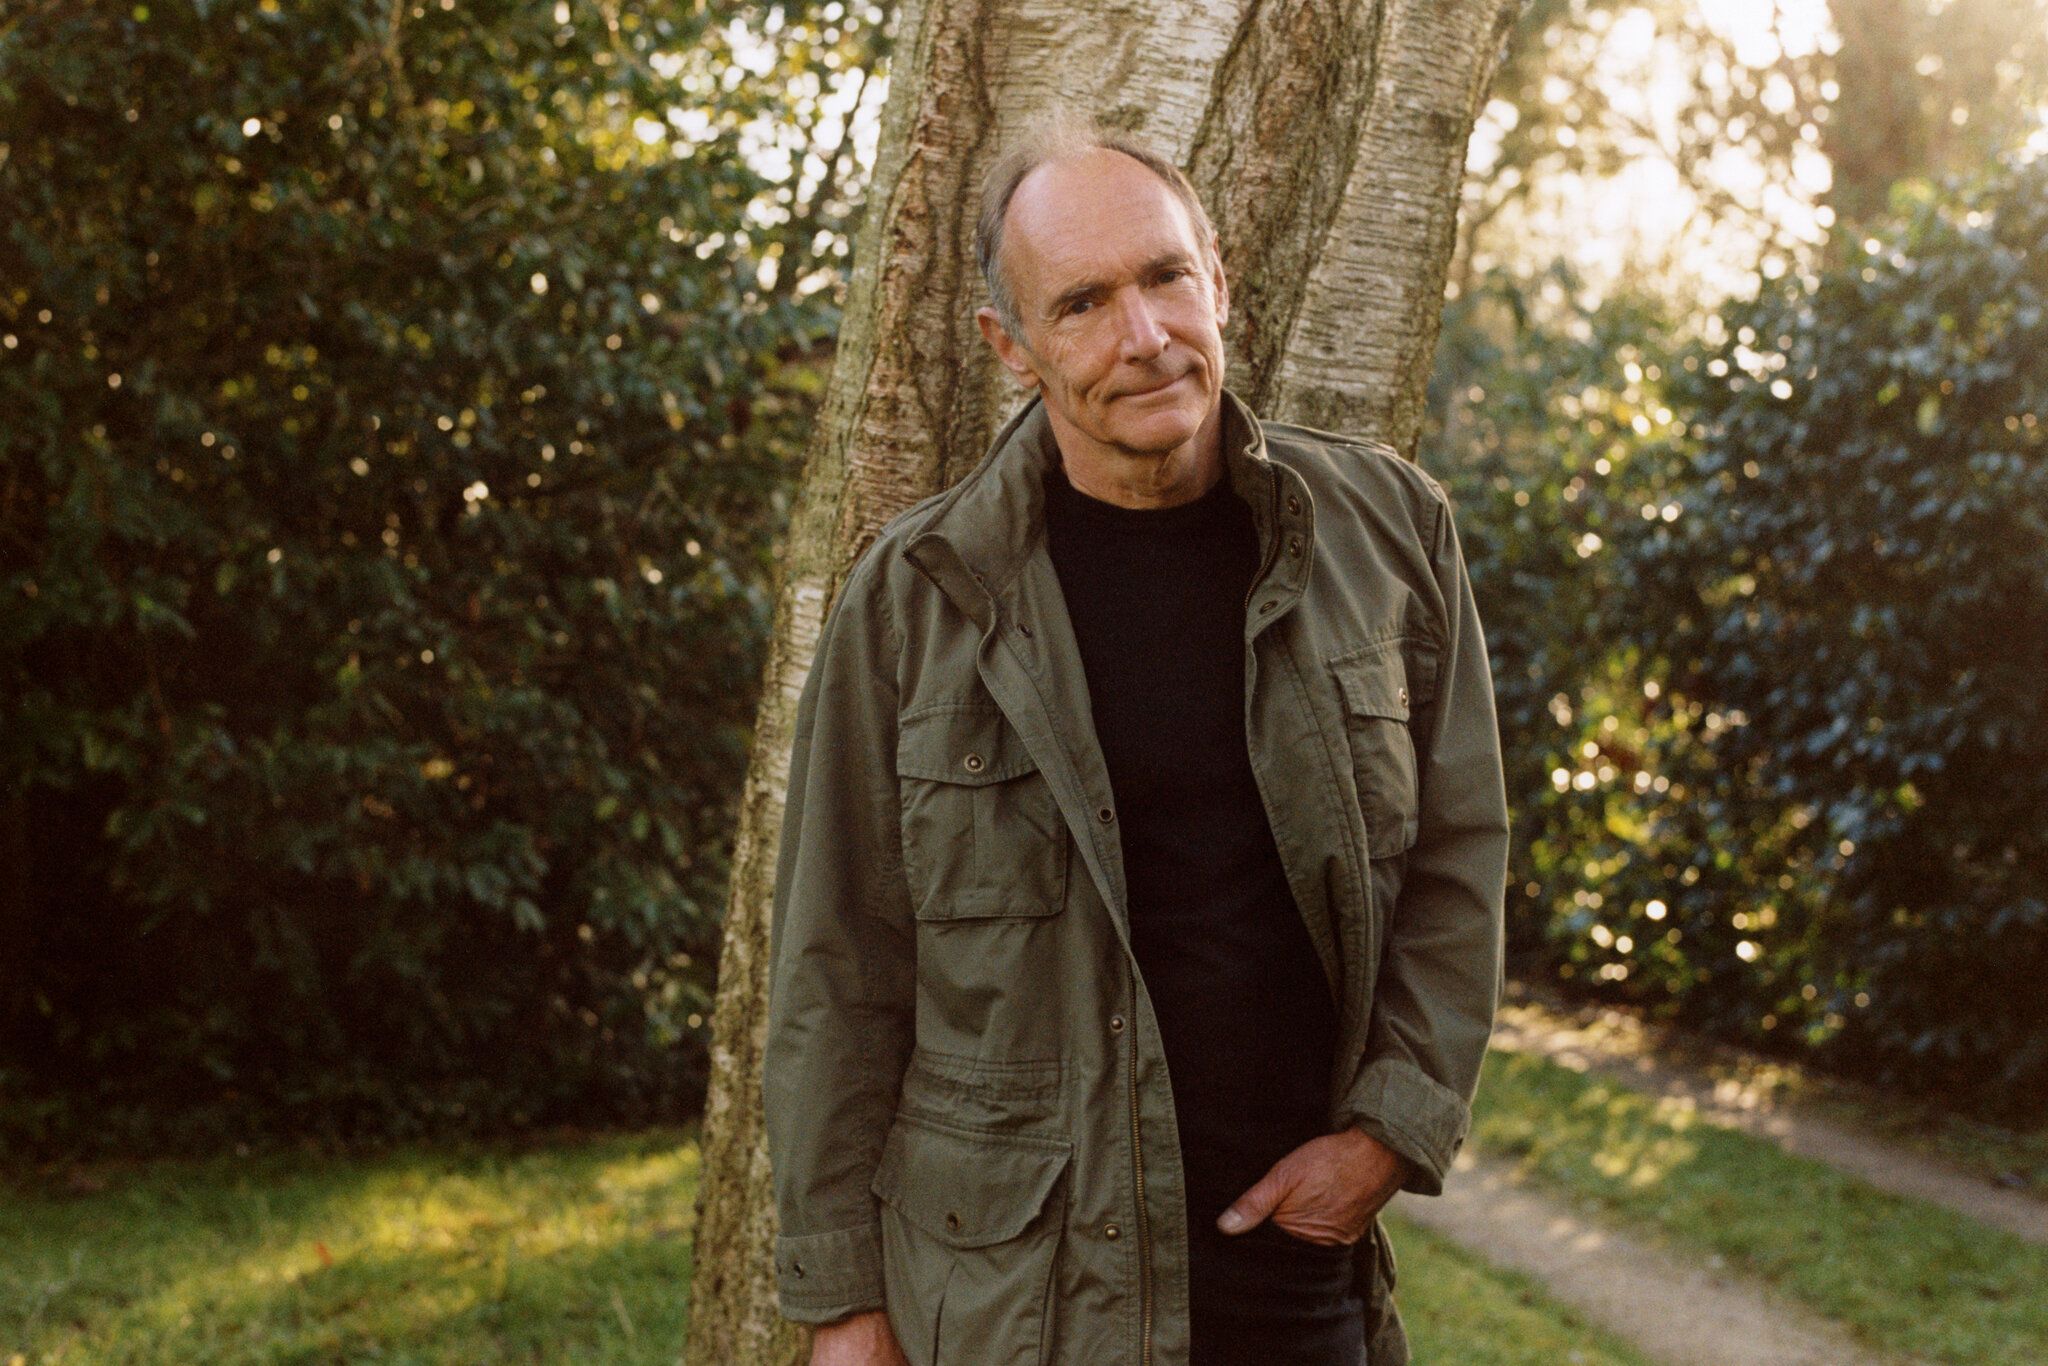 Tim Berners-Lee, at home in Oxfordshire, England, envisions a framework in which personal online data could be stored in a “pod” that the person controlled.